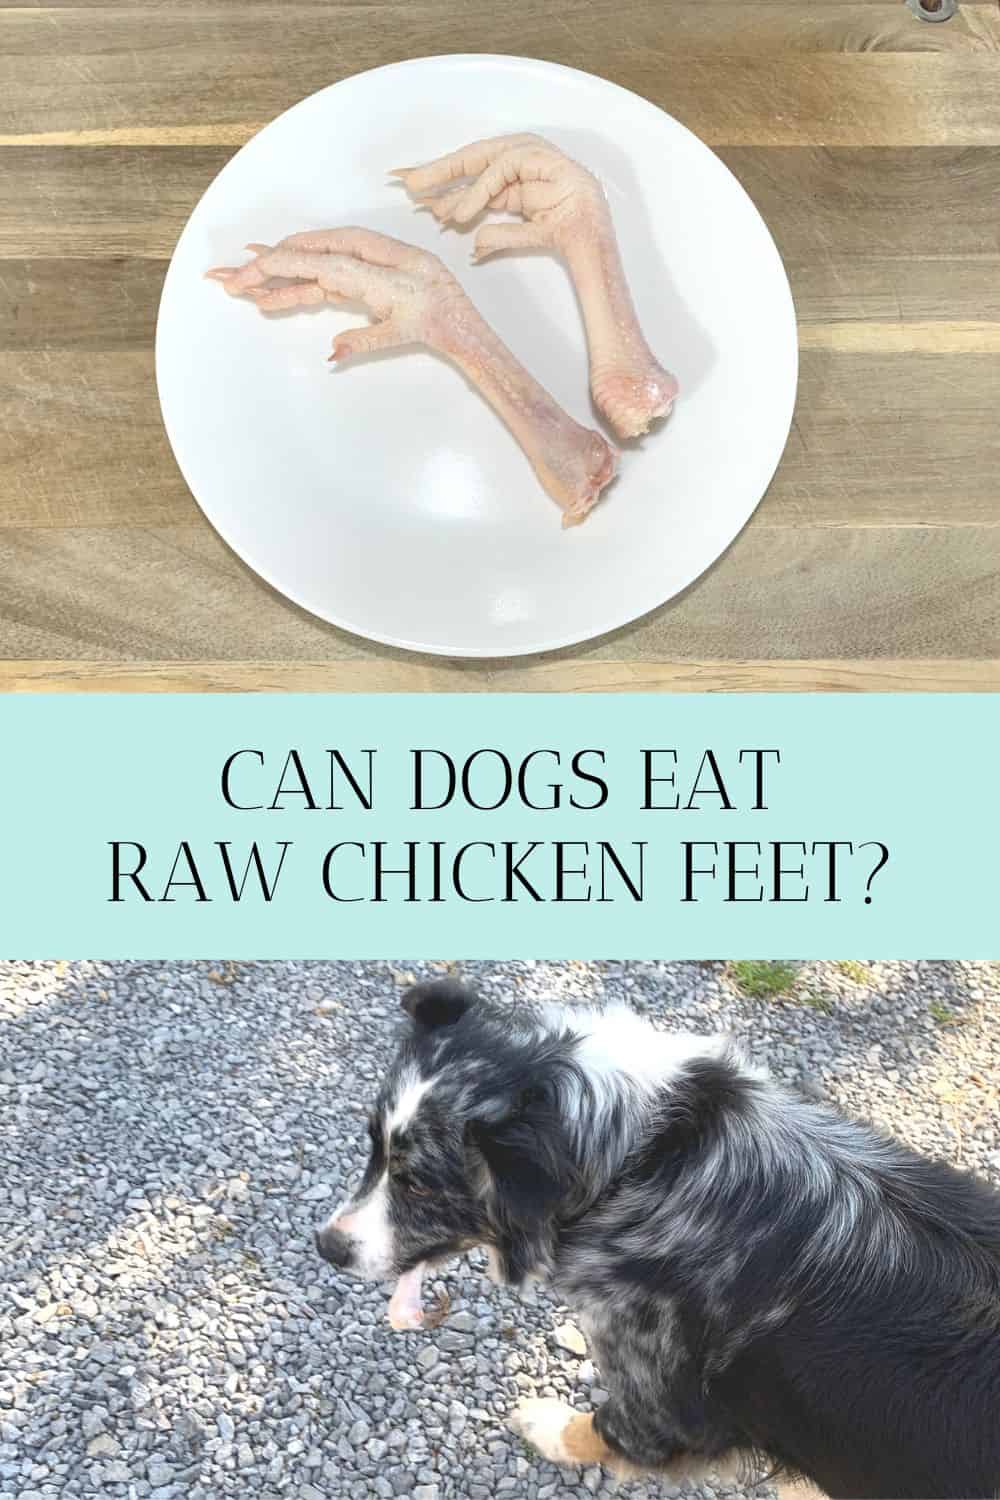 Raw chicken feet on a white plate with a title of "Can Dogs Eat Raw Chicken Feet?" Another picture shows an Australian Shepherd dog walking on a gravel driveway chewing on a raw chicken foot.